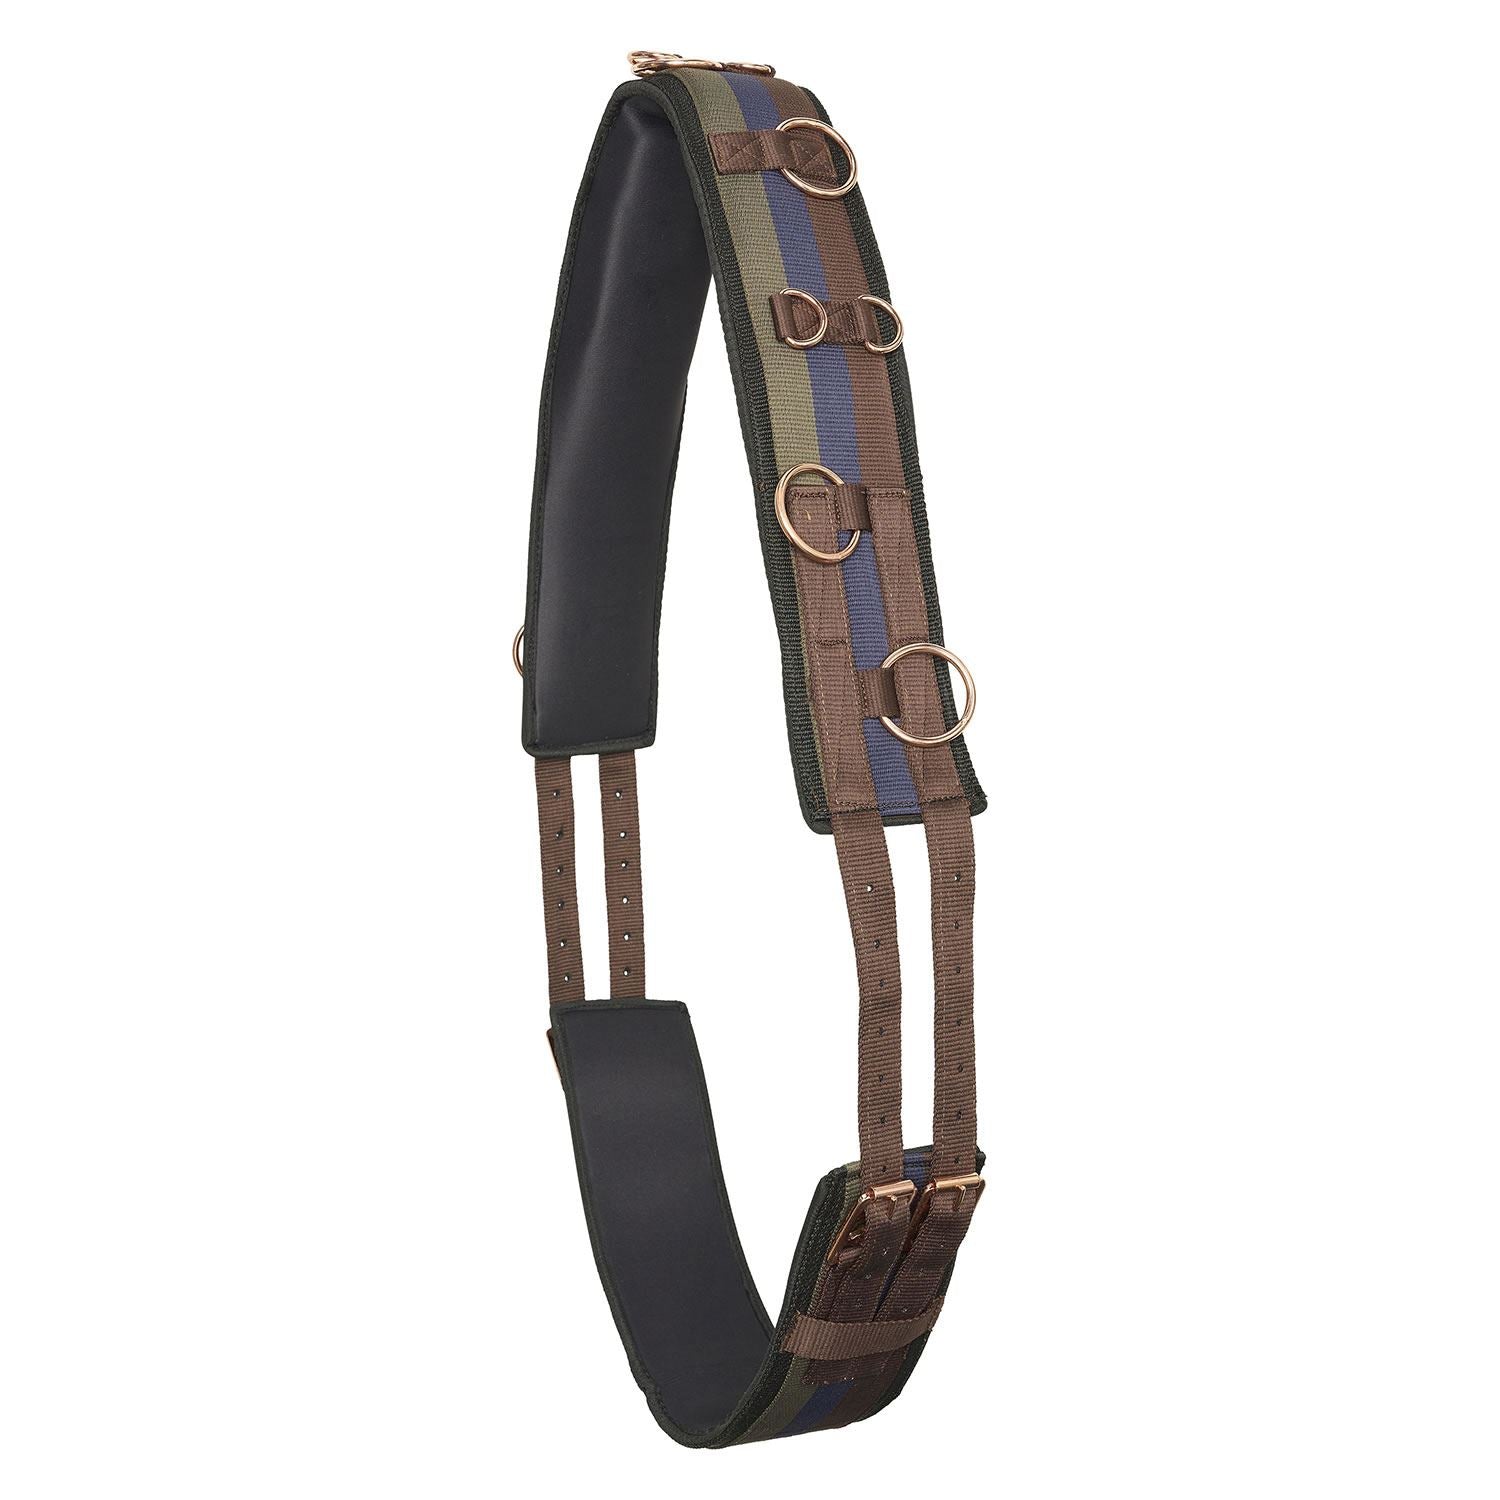 Imperial Riding Lunging Girth Deluxe Extra - Just Horse Riders